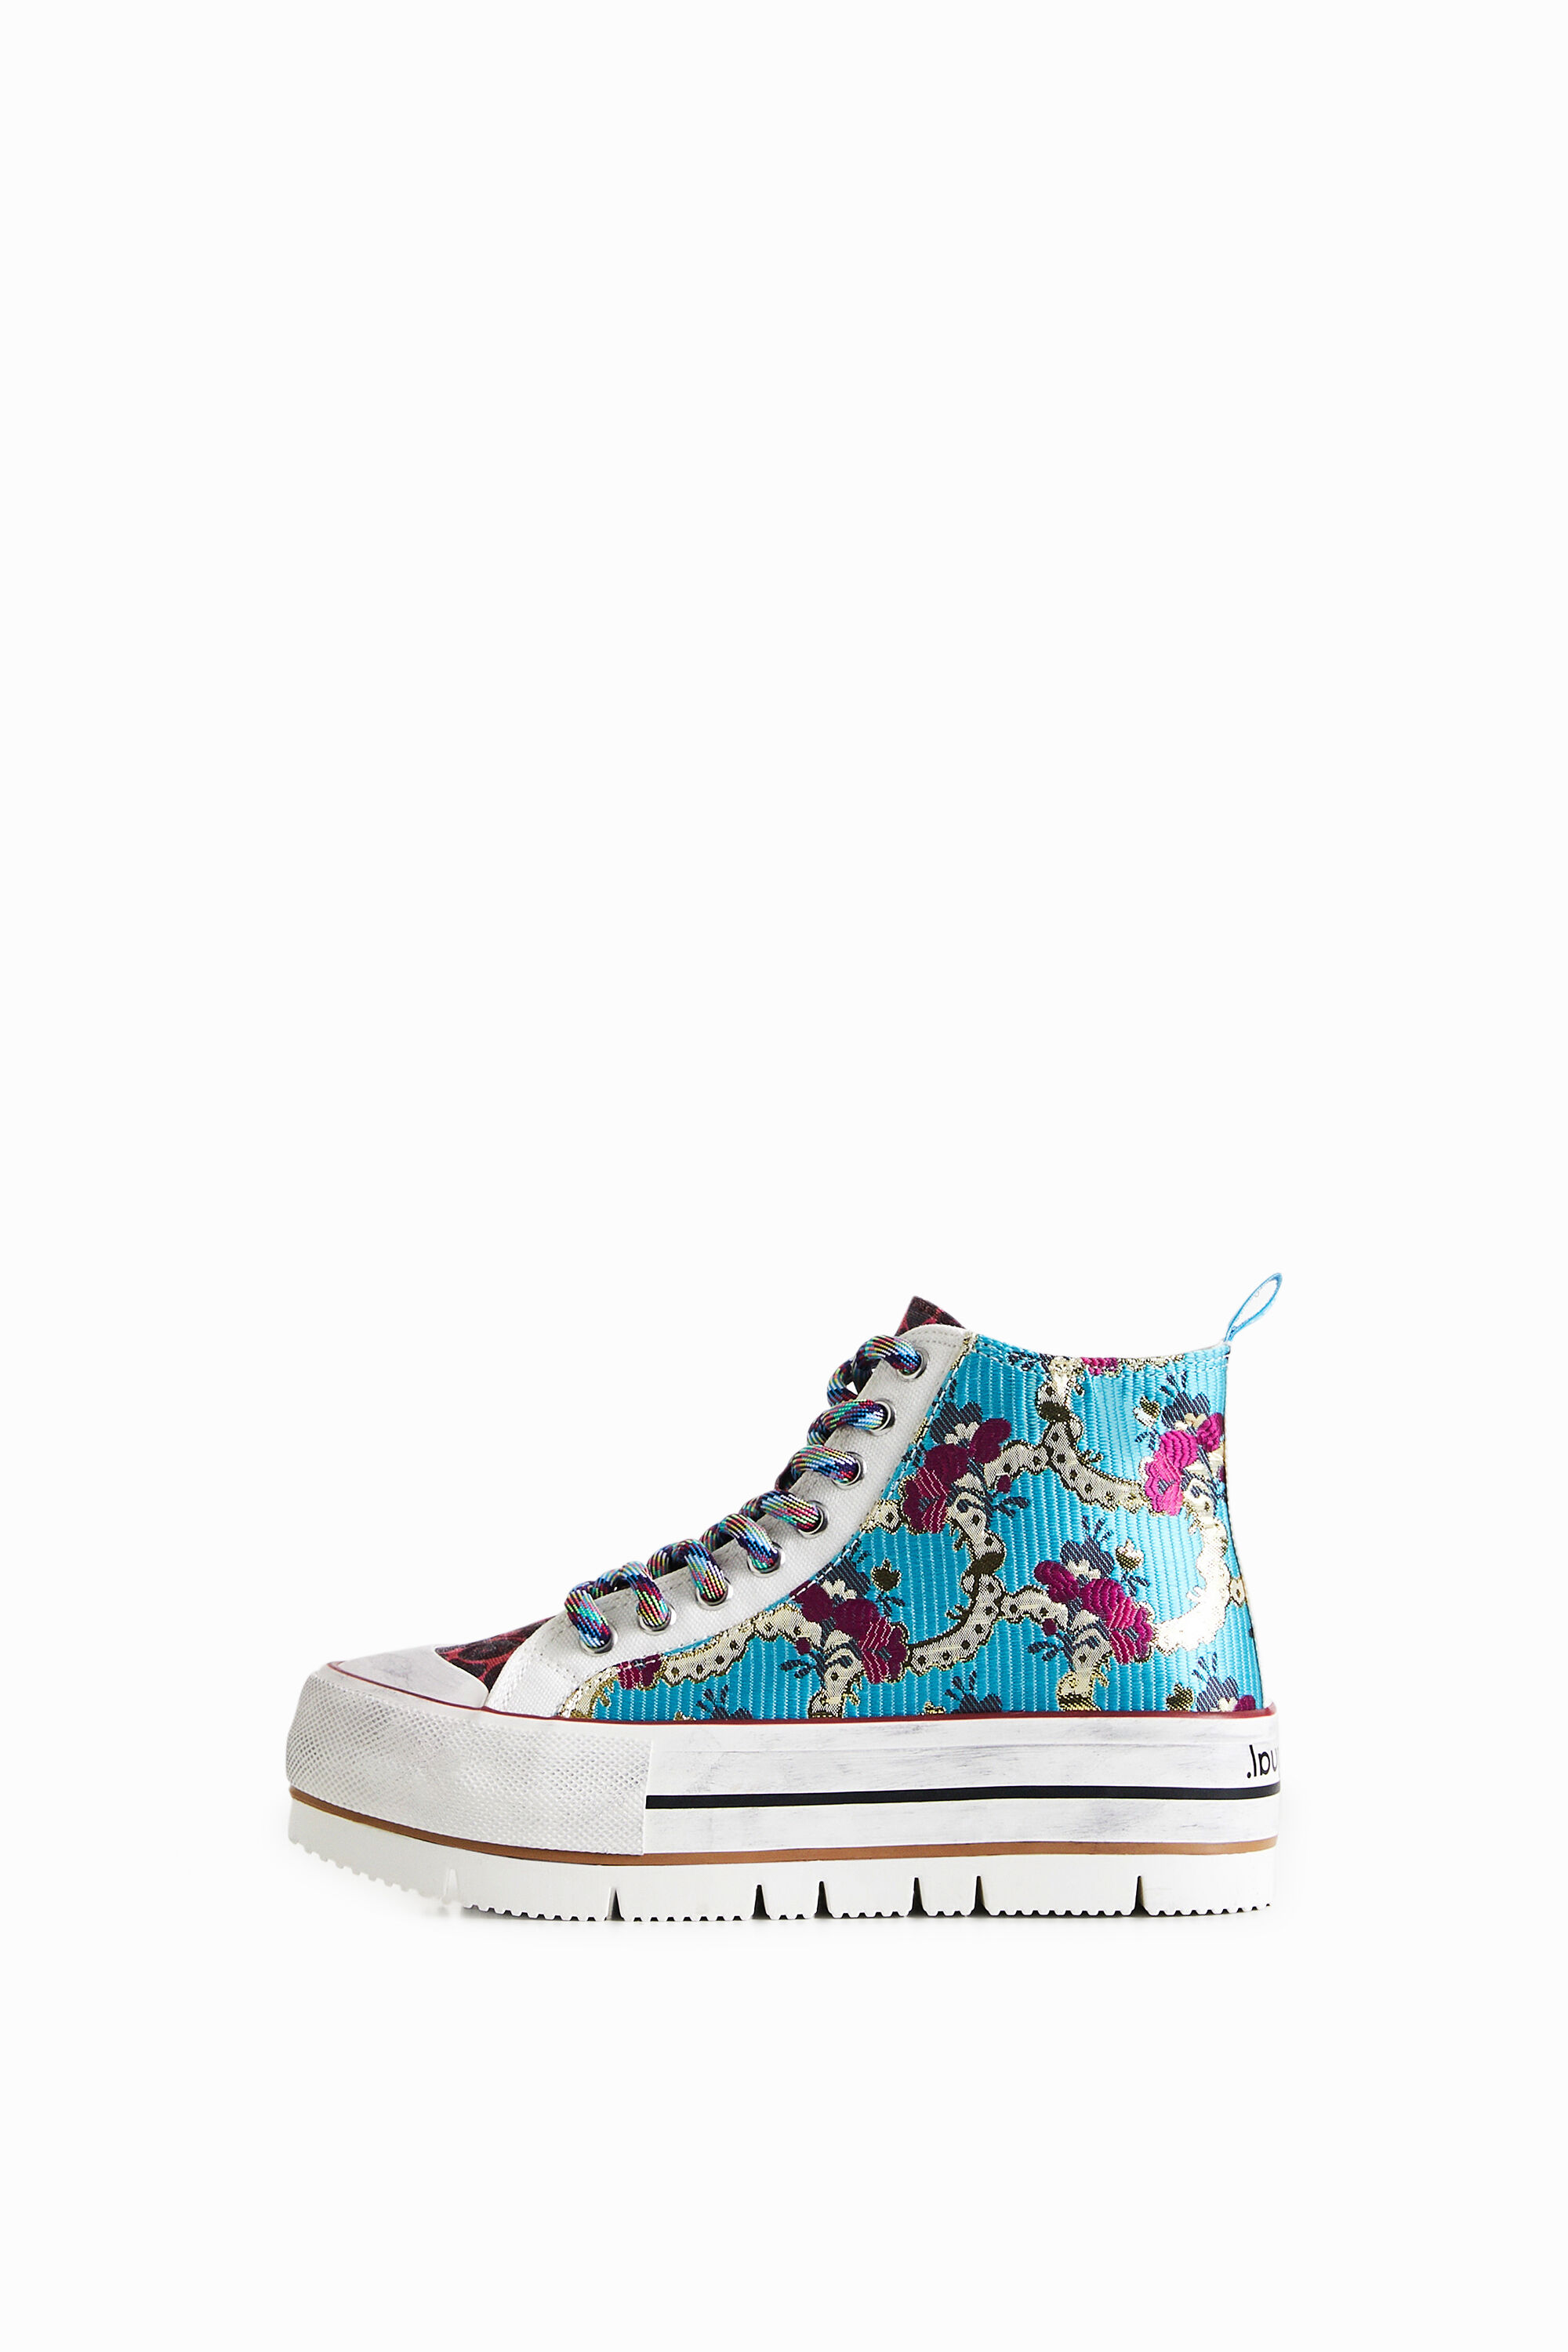 Floral patchwork high-top platform sneakers - MATERIAL FINISHES - 37